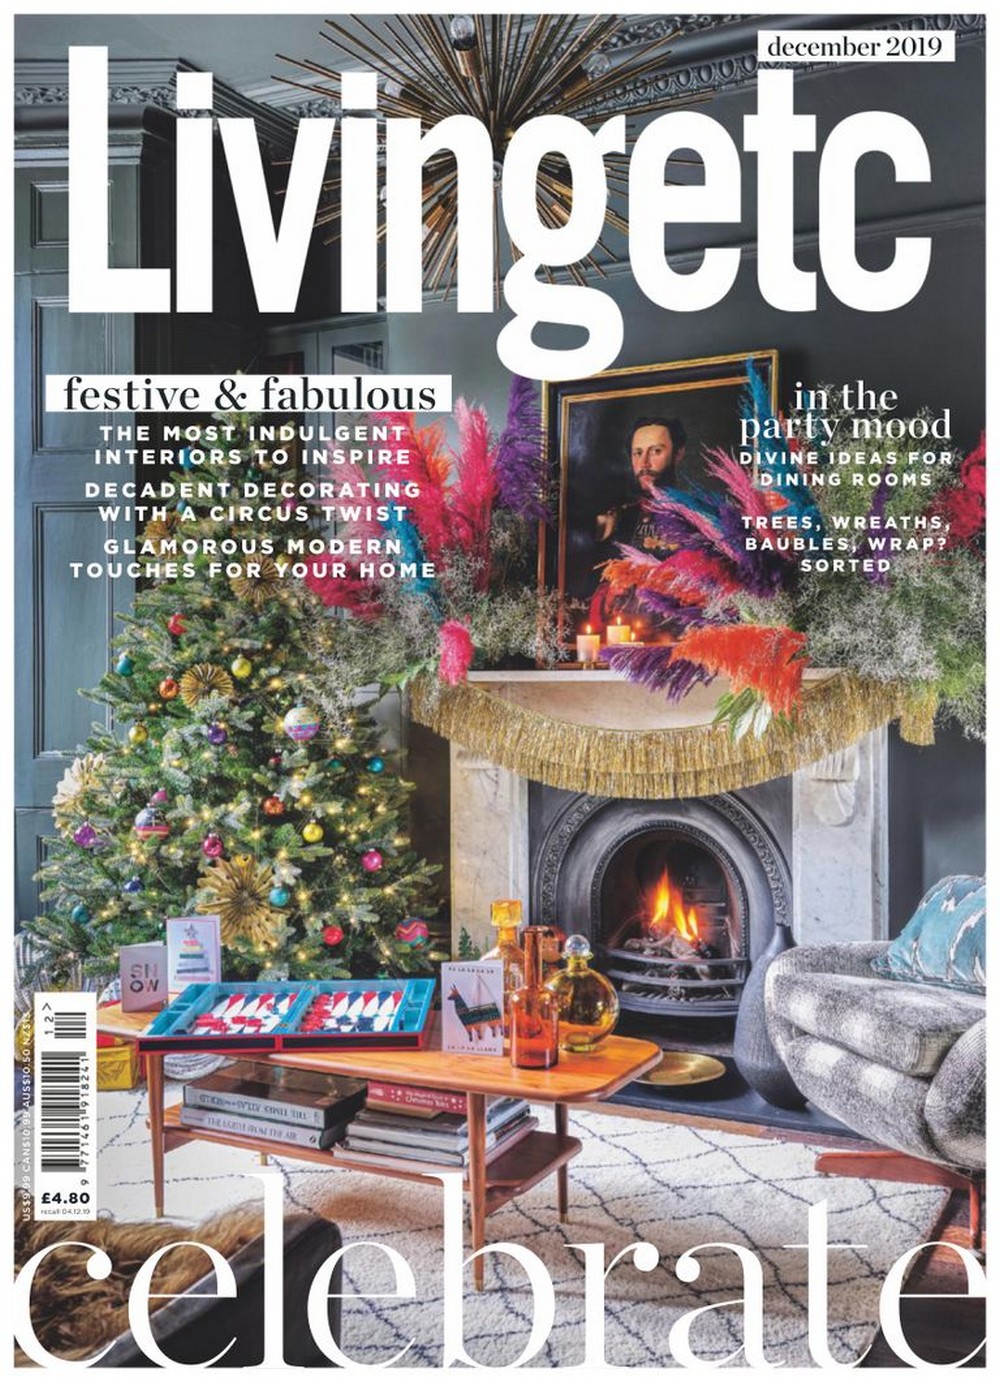 End Up The Year With These 7 Inspiring Interior Design Magazines!